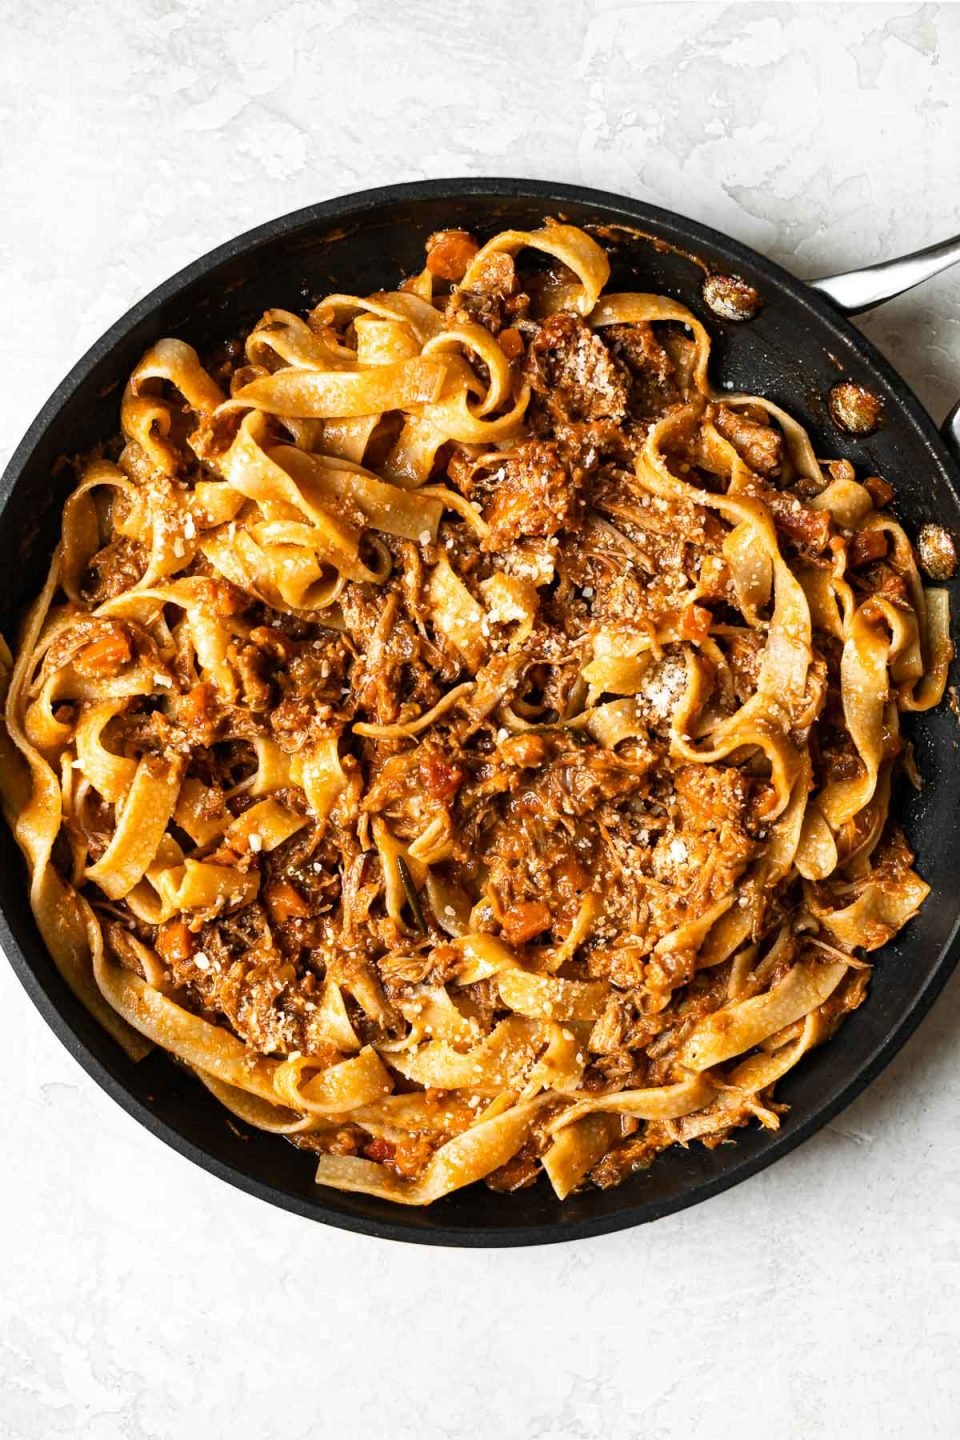 Braised pork ragu tossed into pappardelle pasta in a skillet.